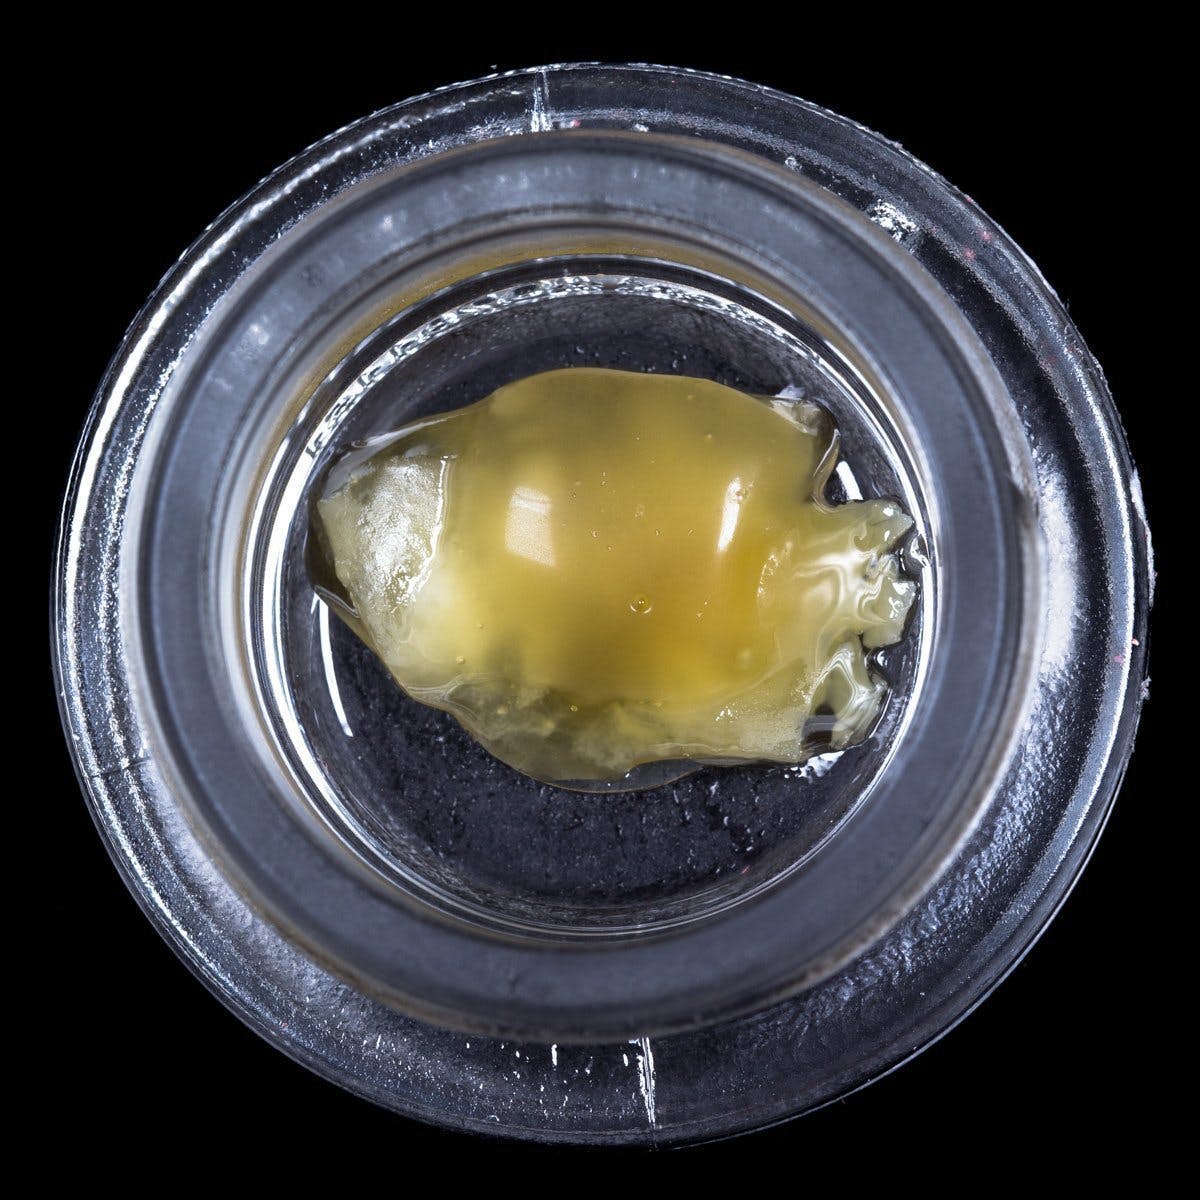 concentrate-710-labs-grease-monkey-2nd-press-live-rosin